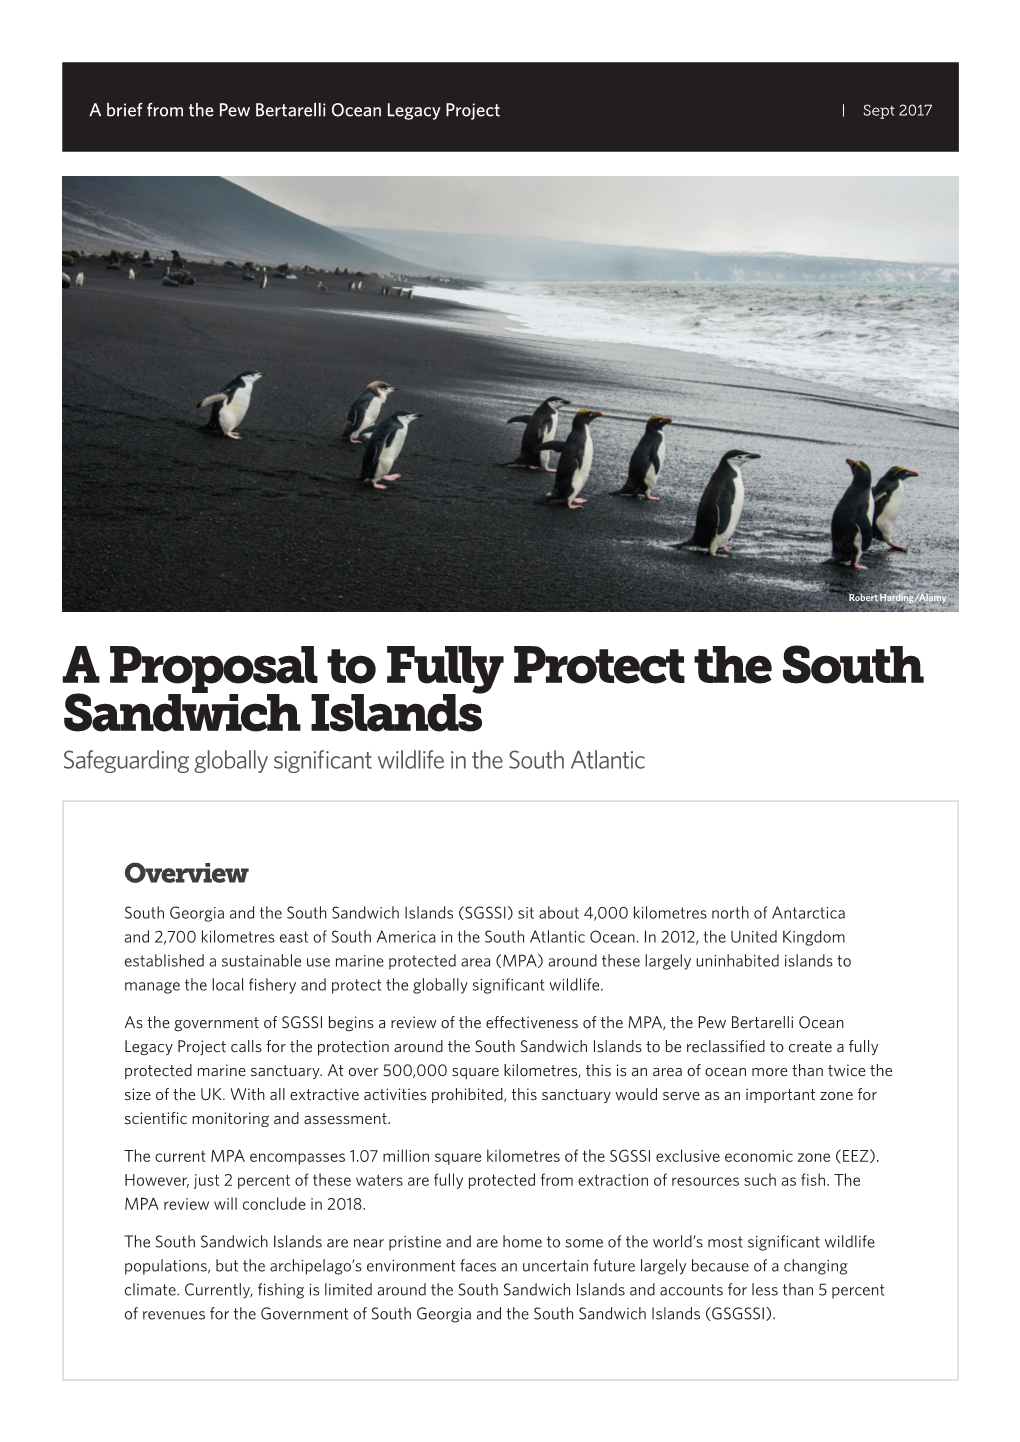 A Proposal to Fully Protect the South Sandwich Islands Safeguarding Globally Significant Wildlife in the South Atlantic